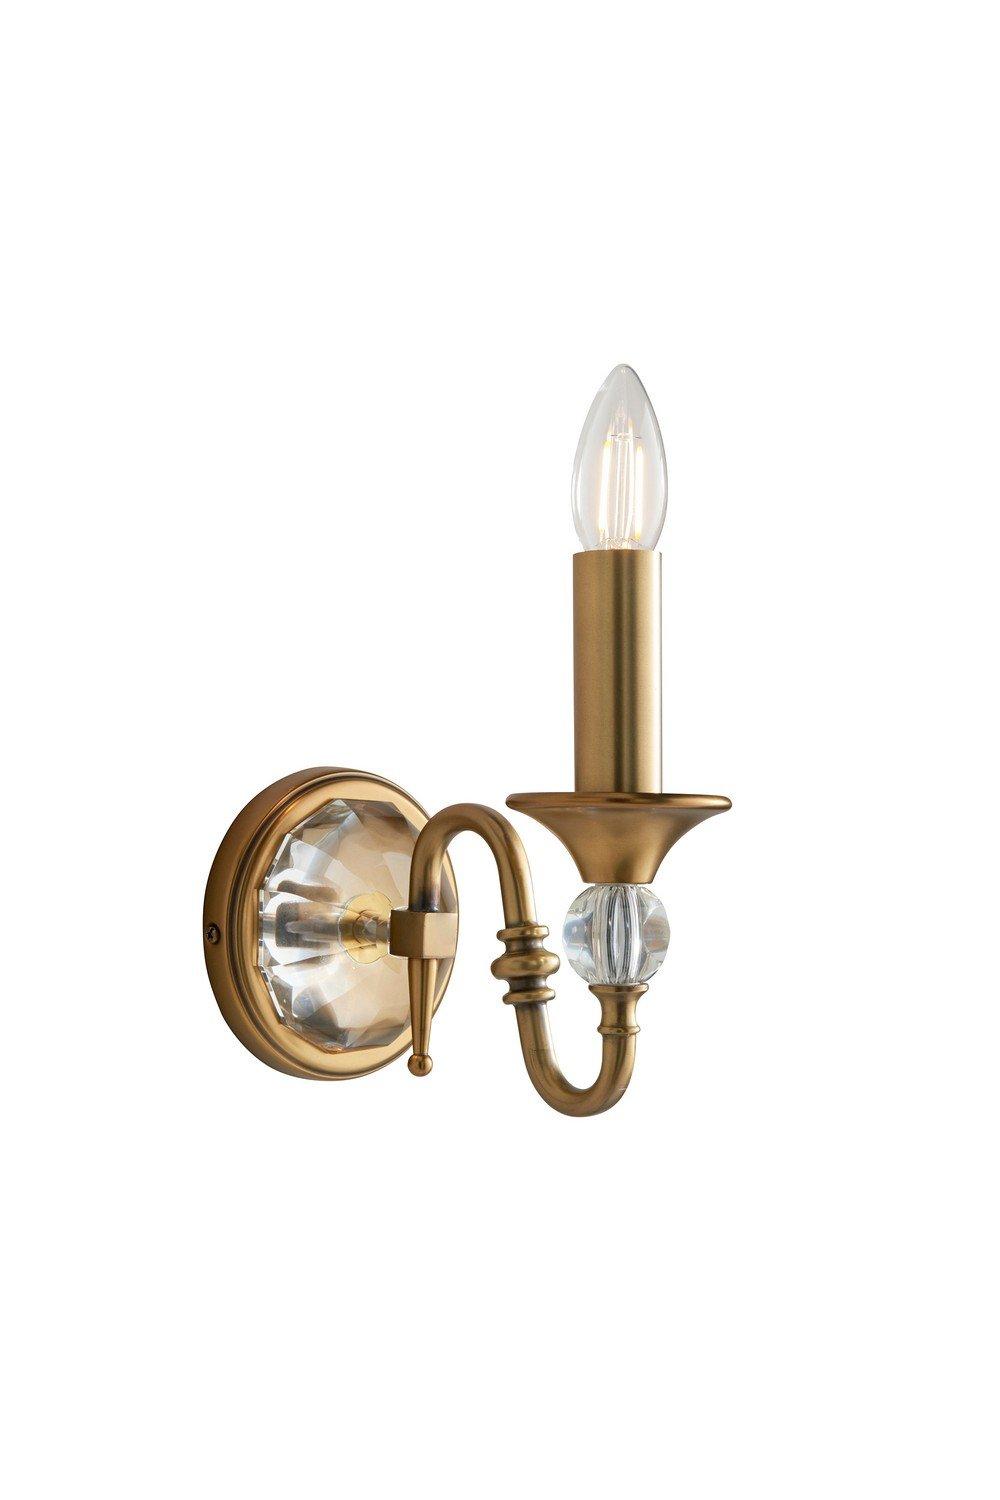 Polina 1 Light Indoor Candle Wall Light Antique Brass With Crystal E14